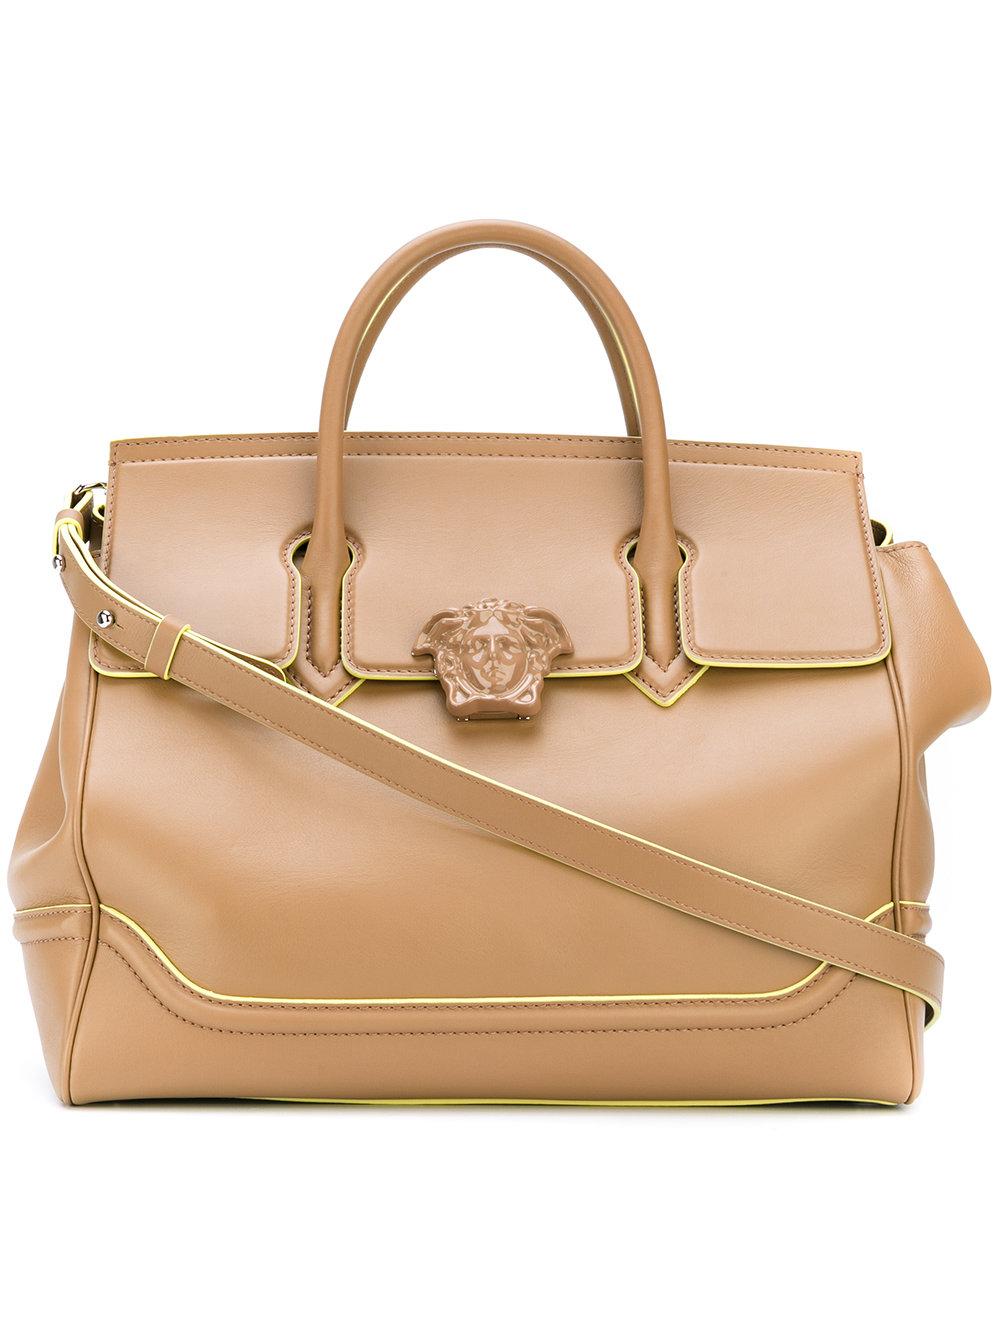 Versace Palazzo Empire Tote Bag in Brown | Lyst